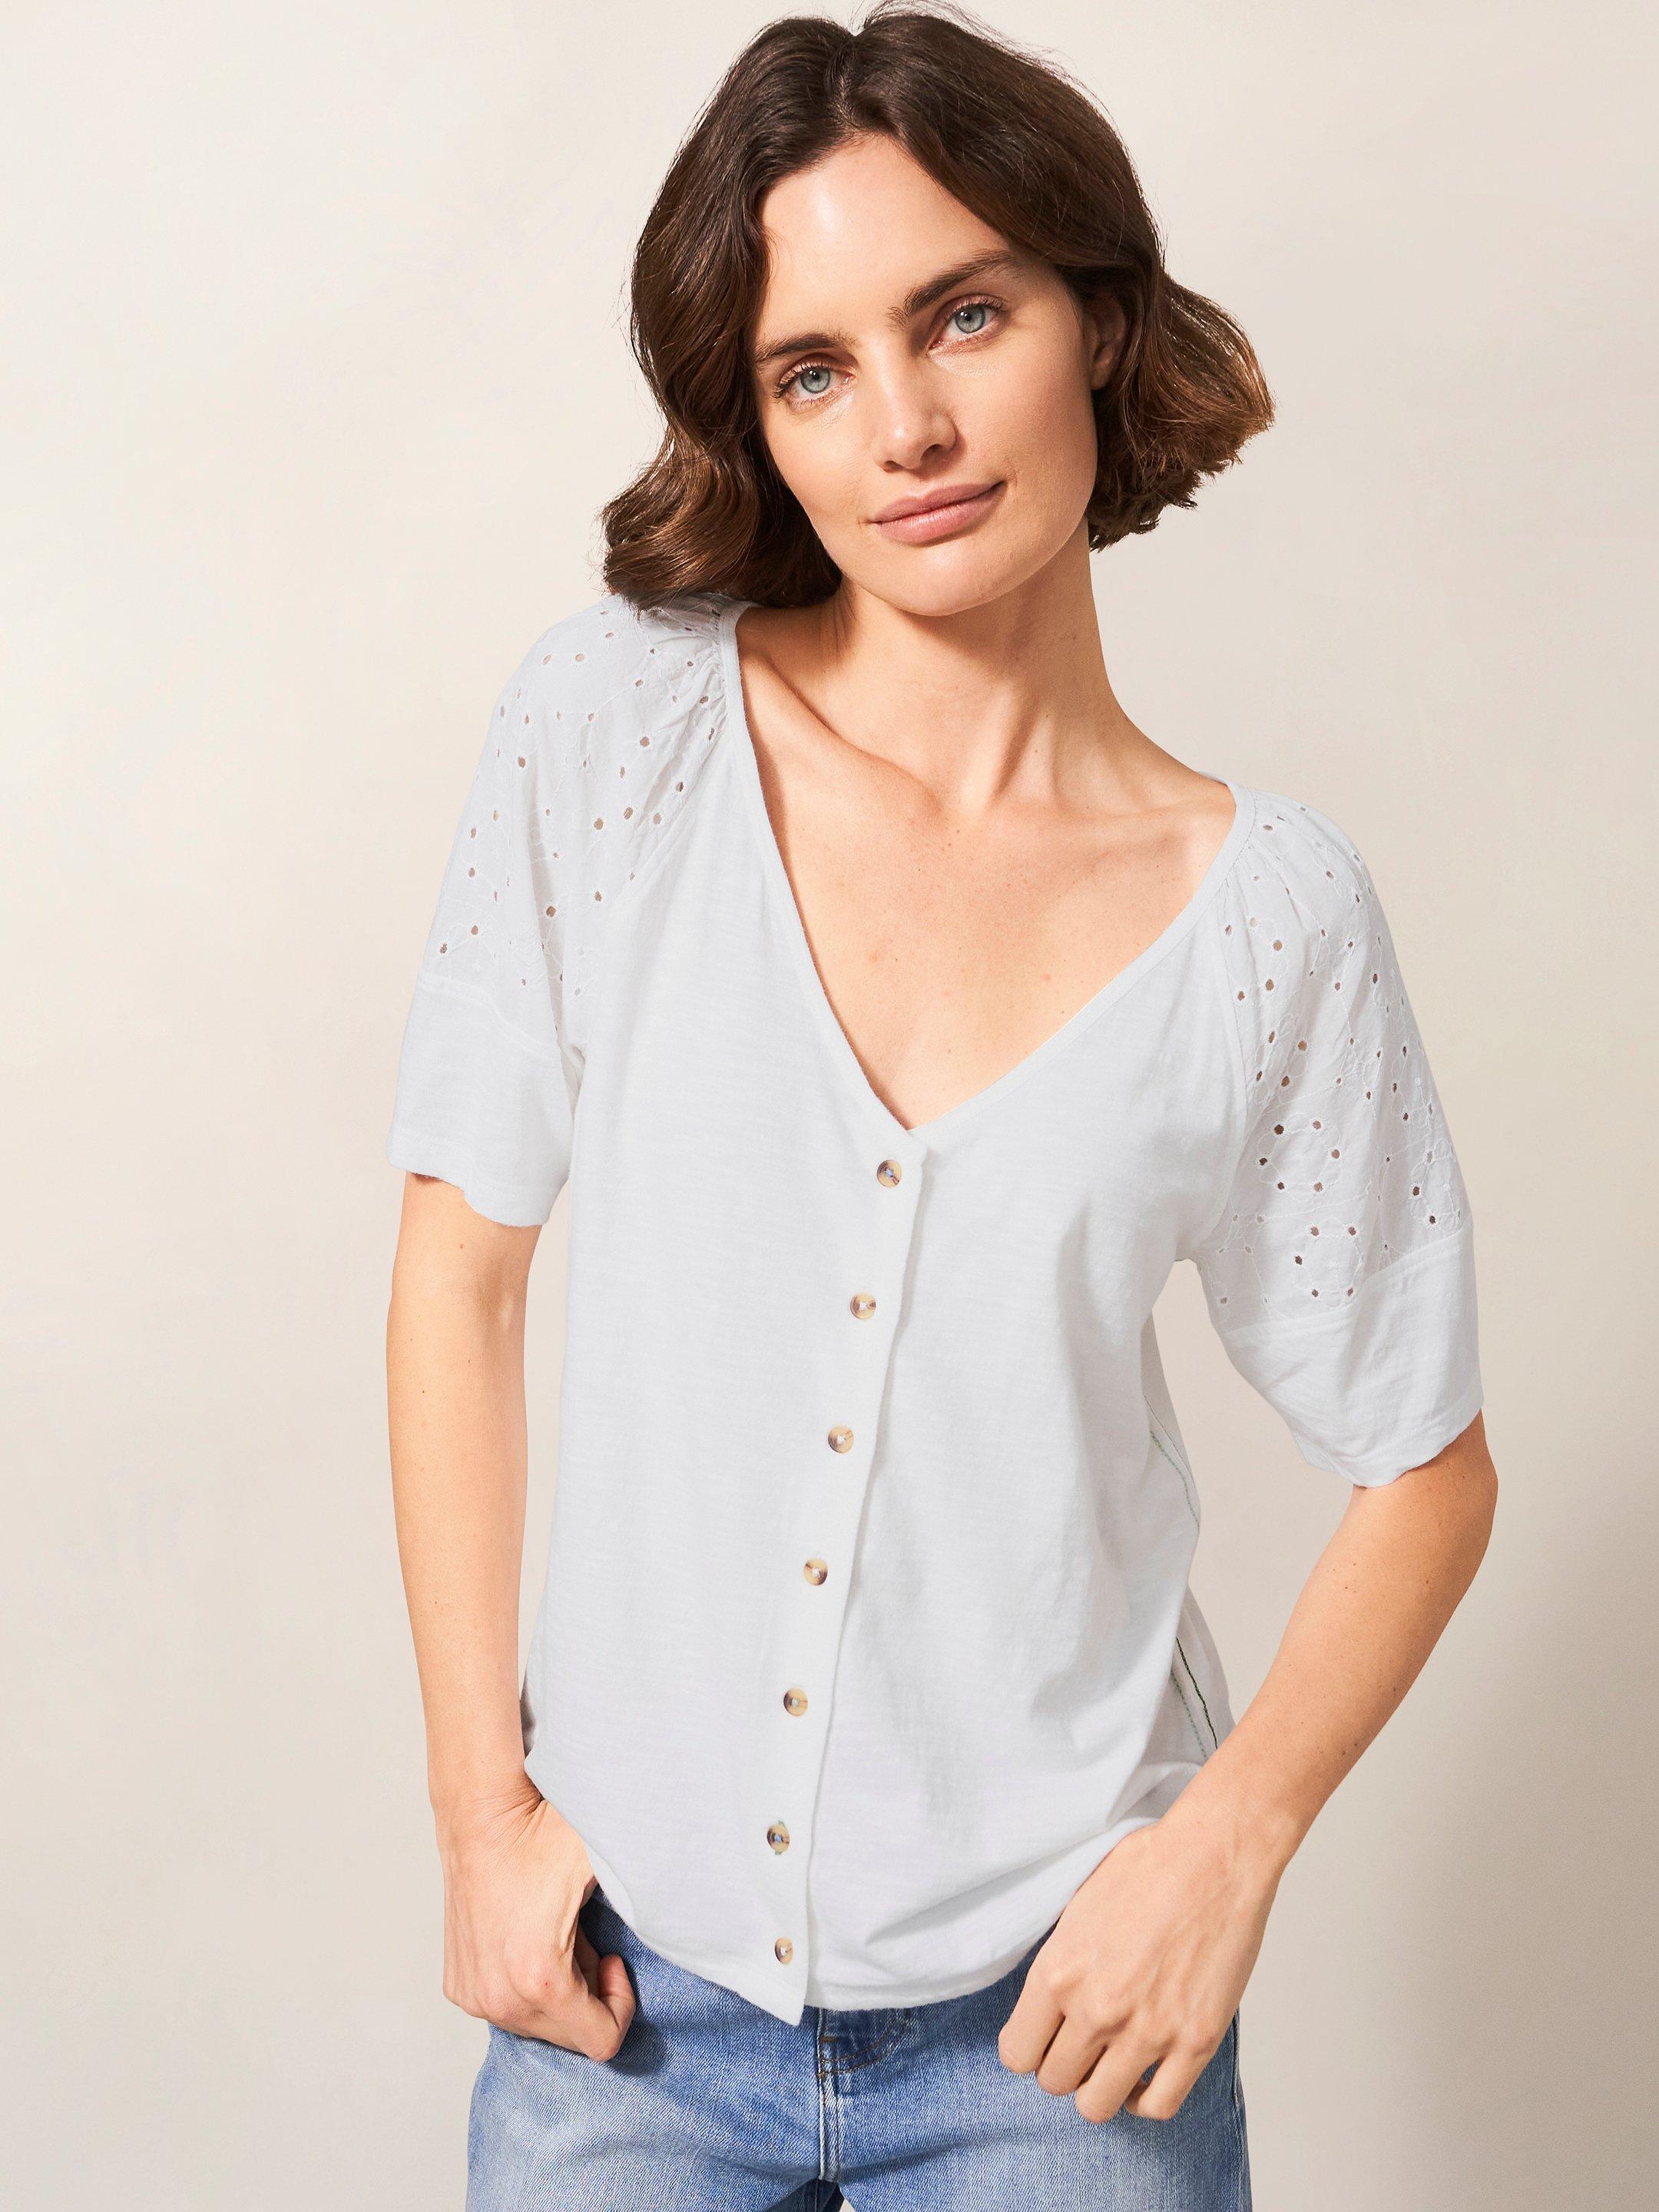 BRODERIE MIX TWO WAY TOP in BRIL WHITE - LIFESTYLE